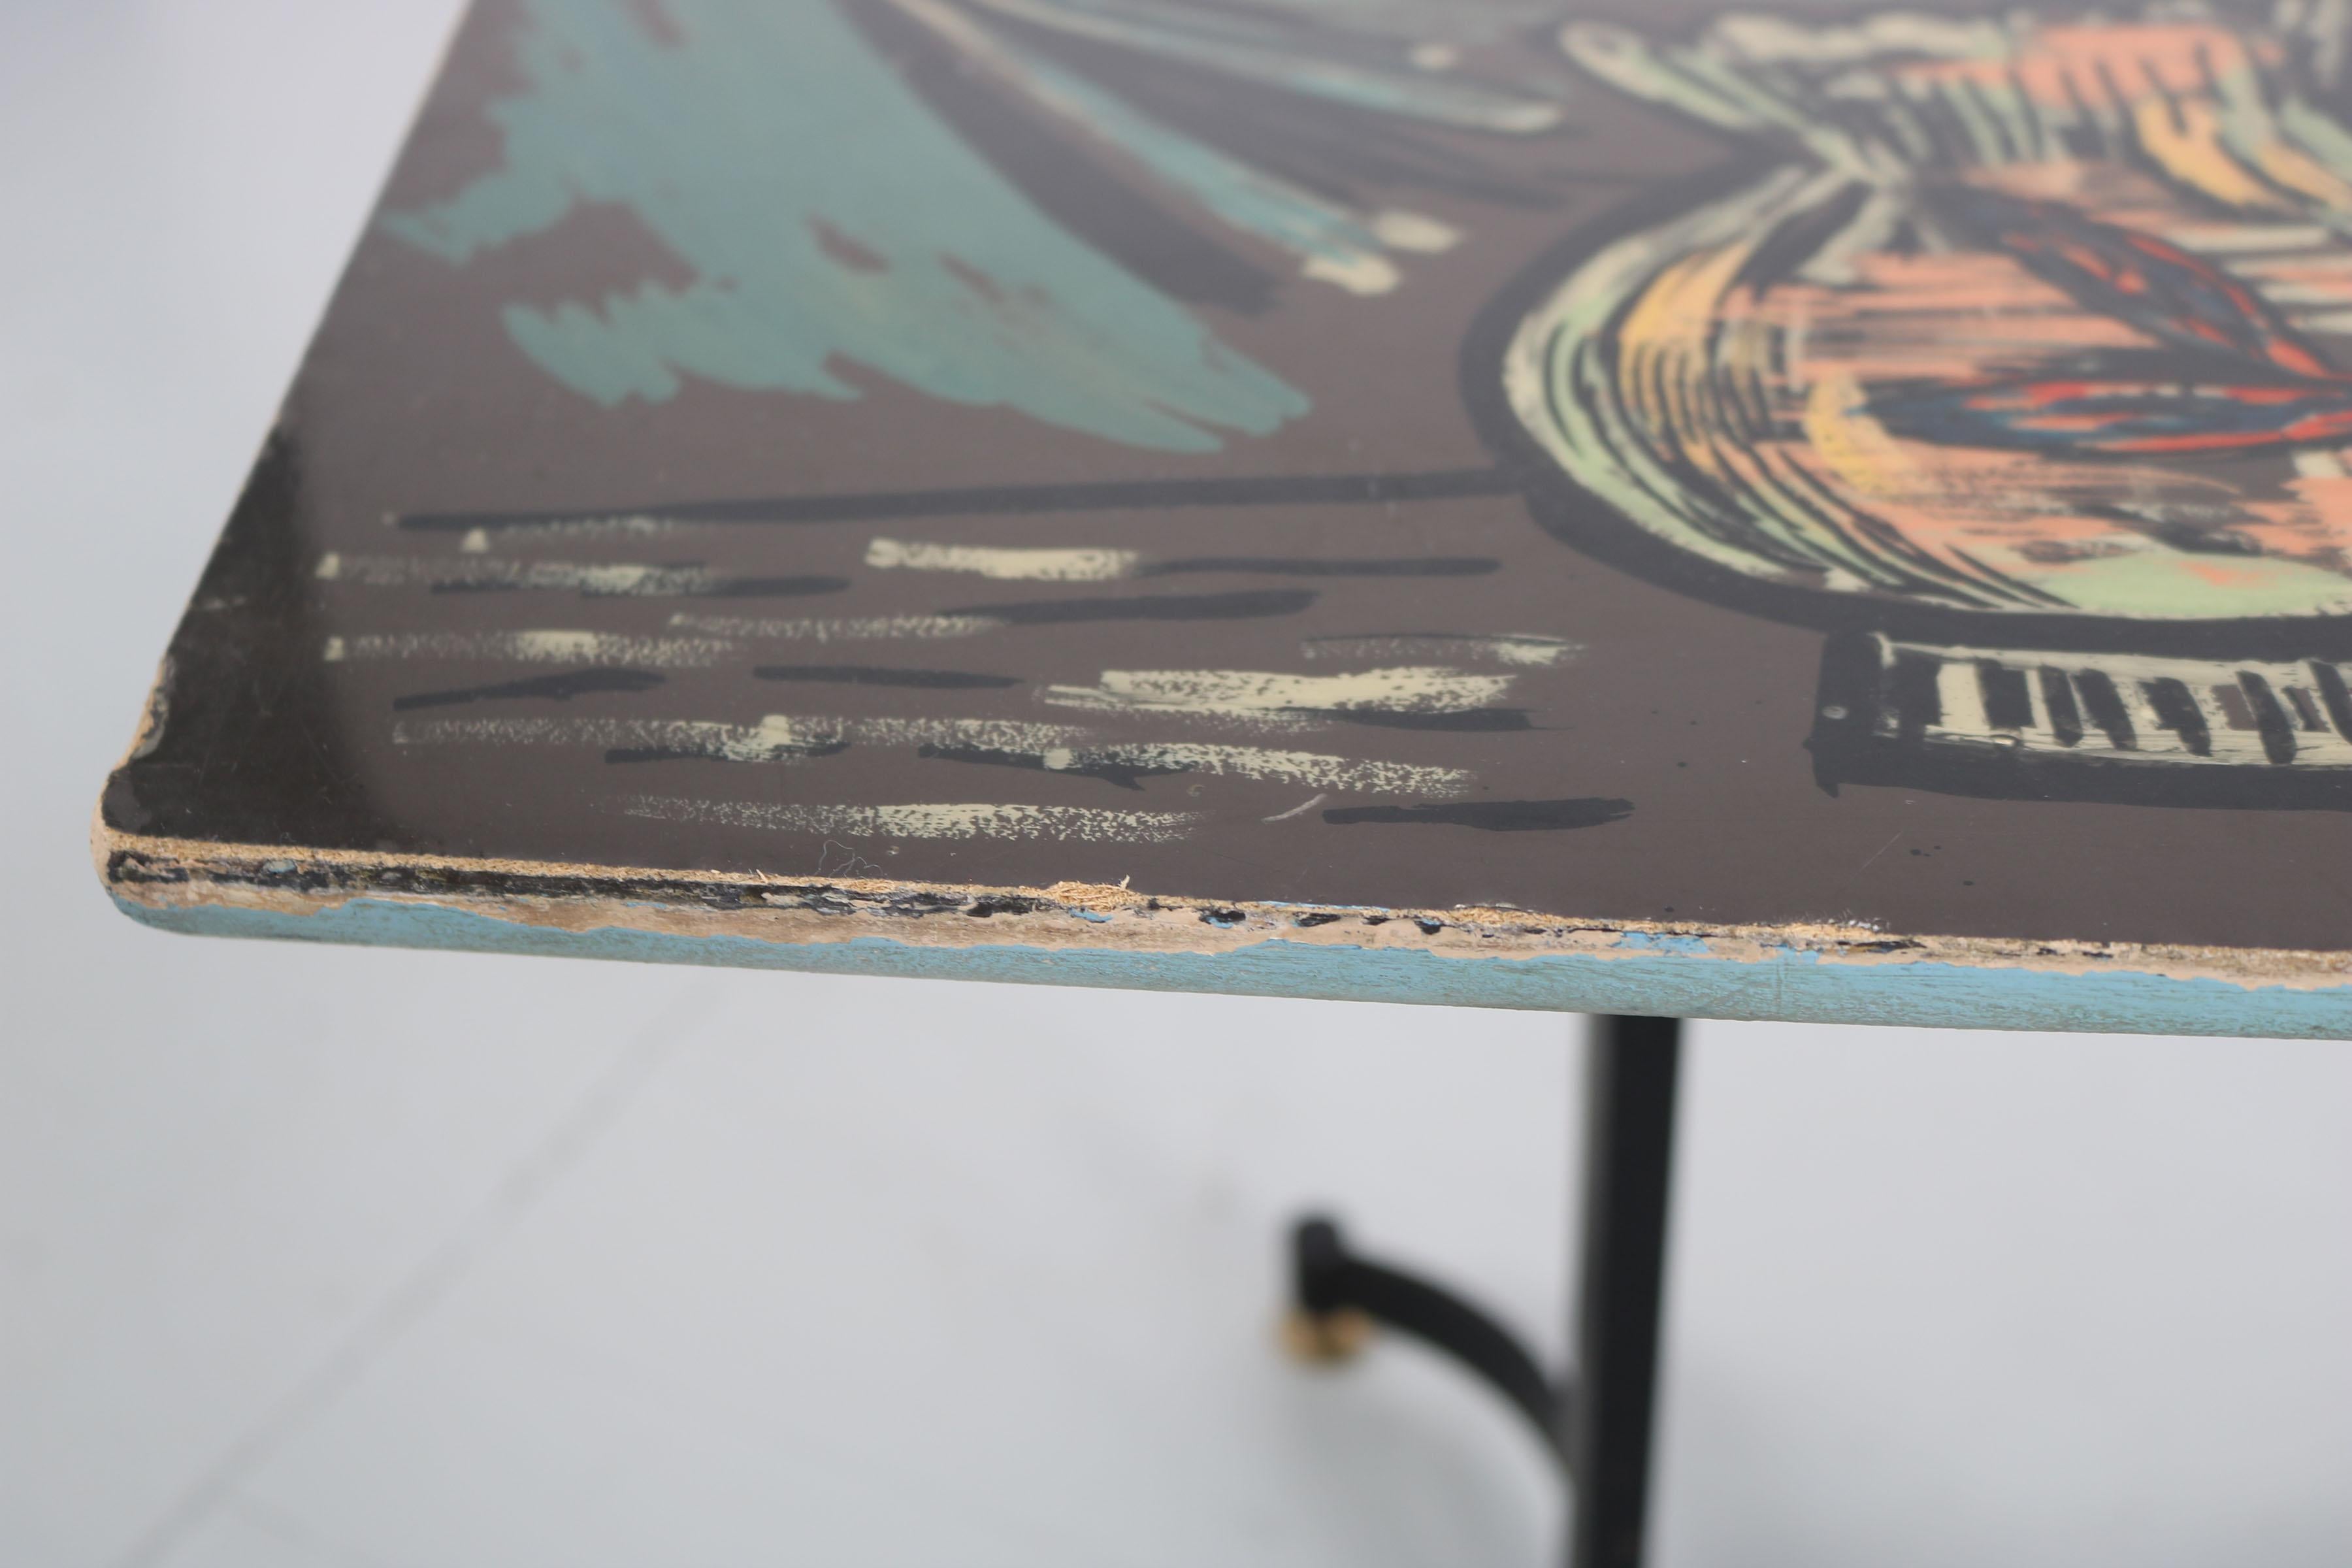 Italian Dark Sofa Table with Colorful Hand Painted Motives on Table Top, 1950s For Sale 2